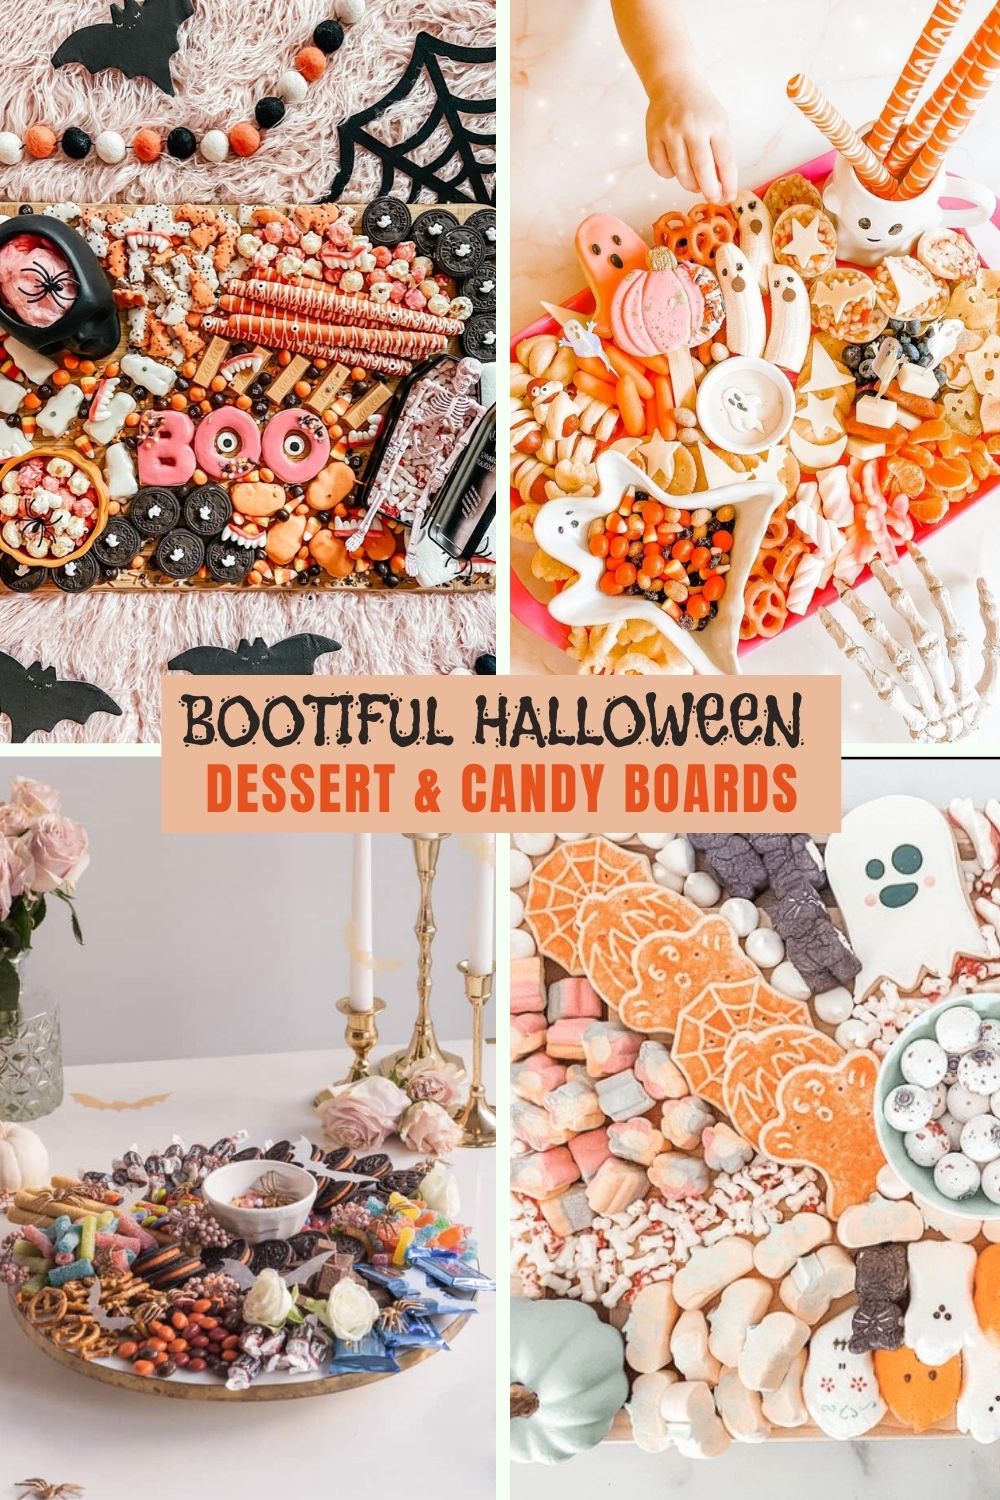 The most amazing Halloween dessert board and Halloween candy trays